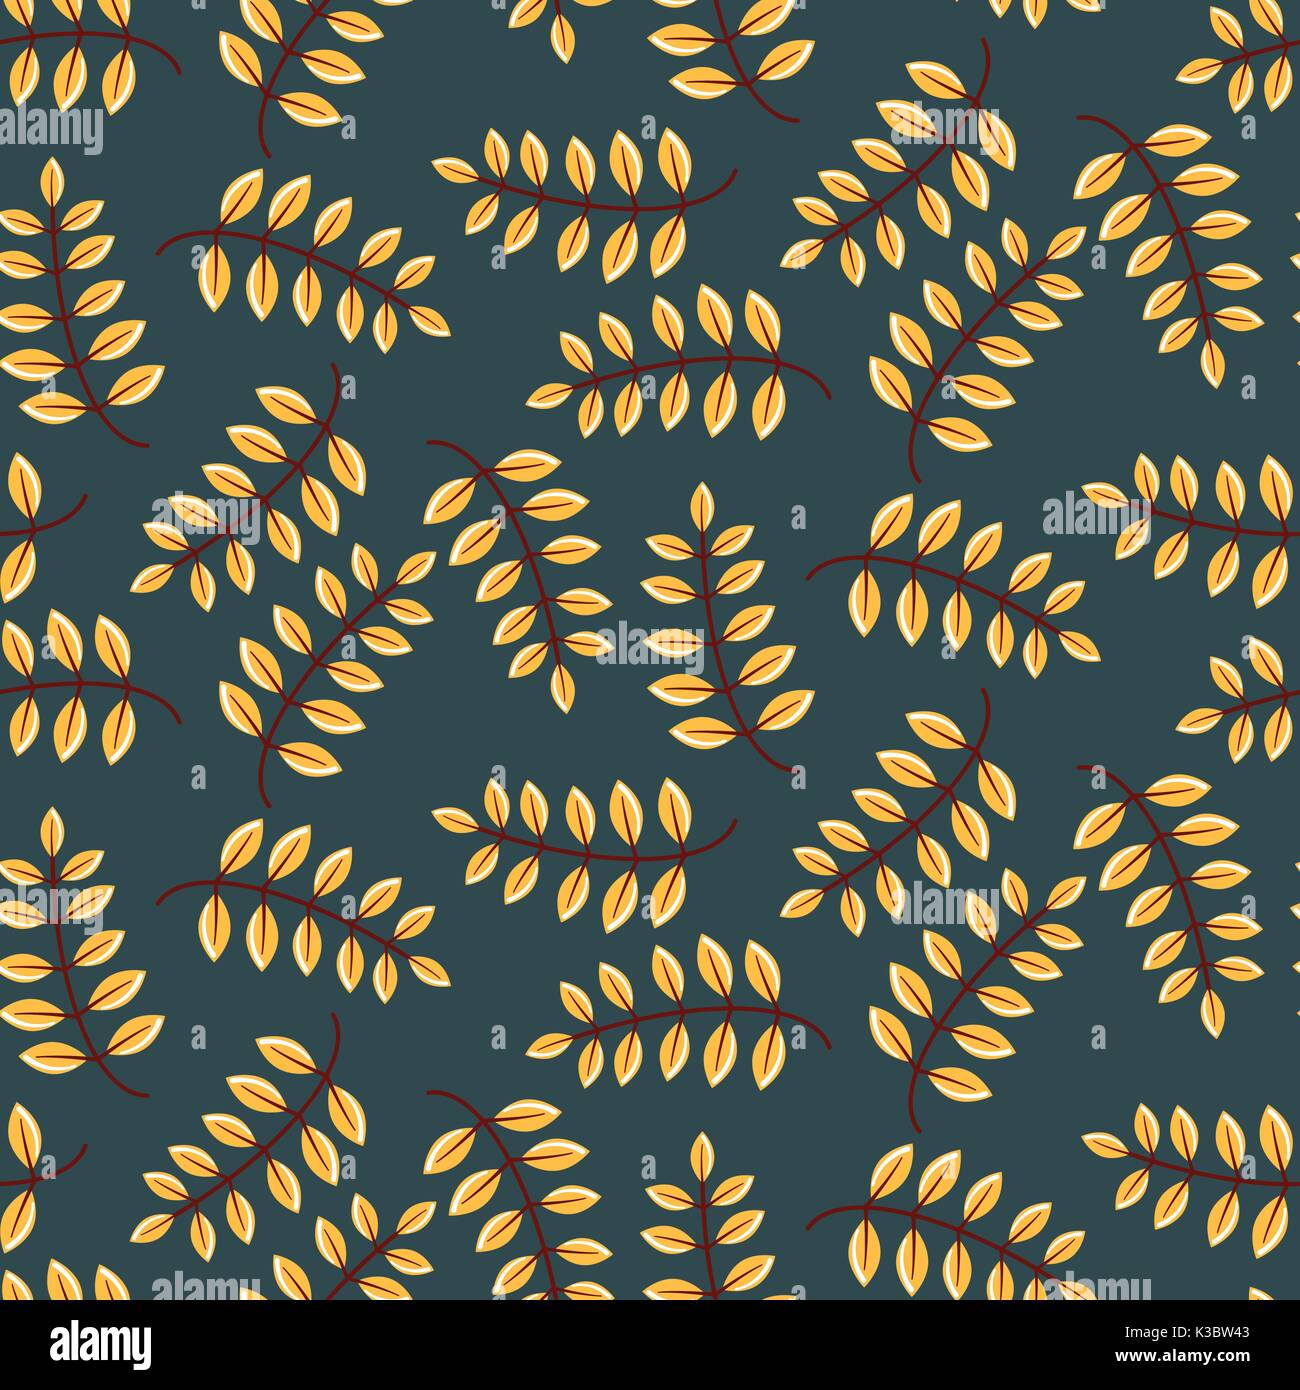 Autumn yellow fall withered leaves seamless pattern. Stock Vector